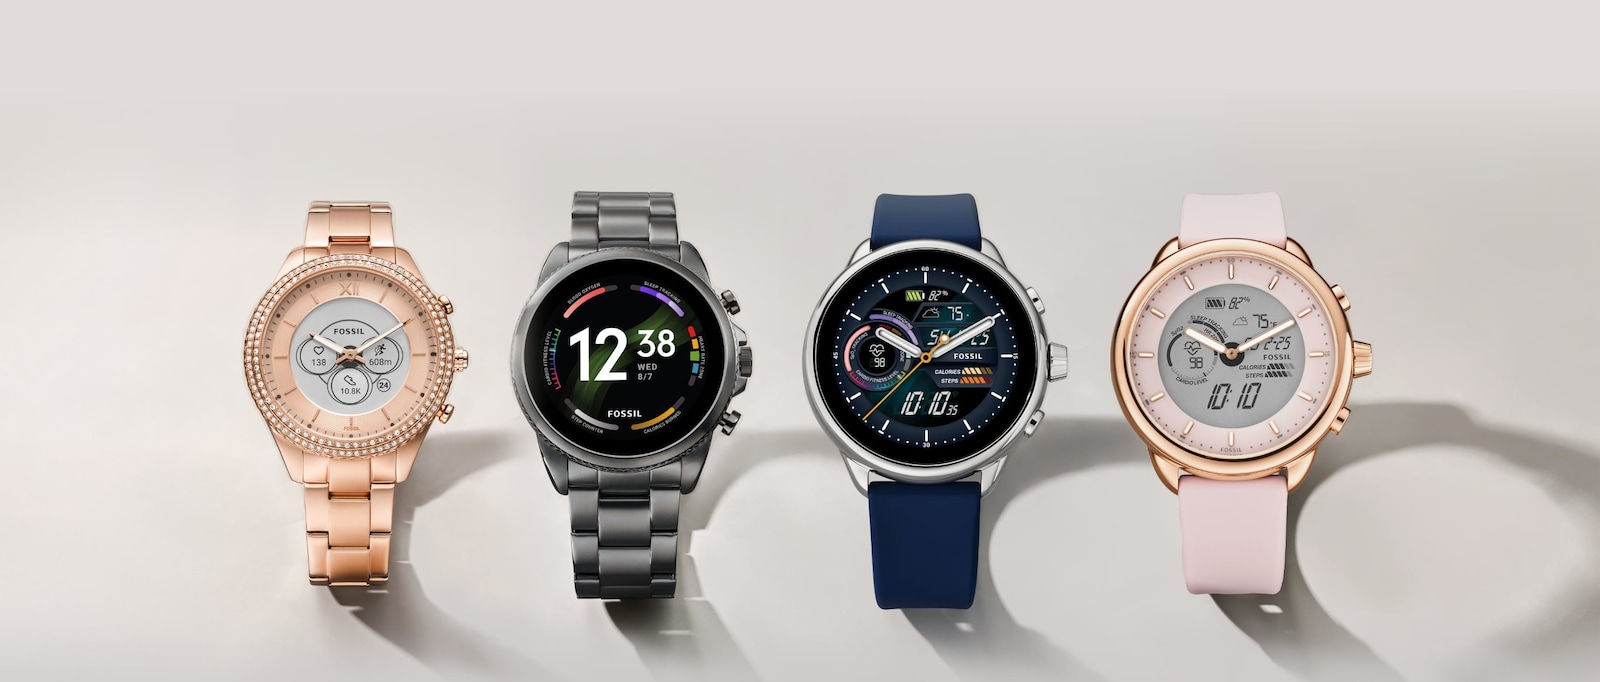 The Gen 6 Family of smartwatches.